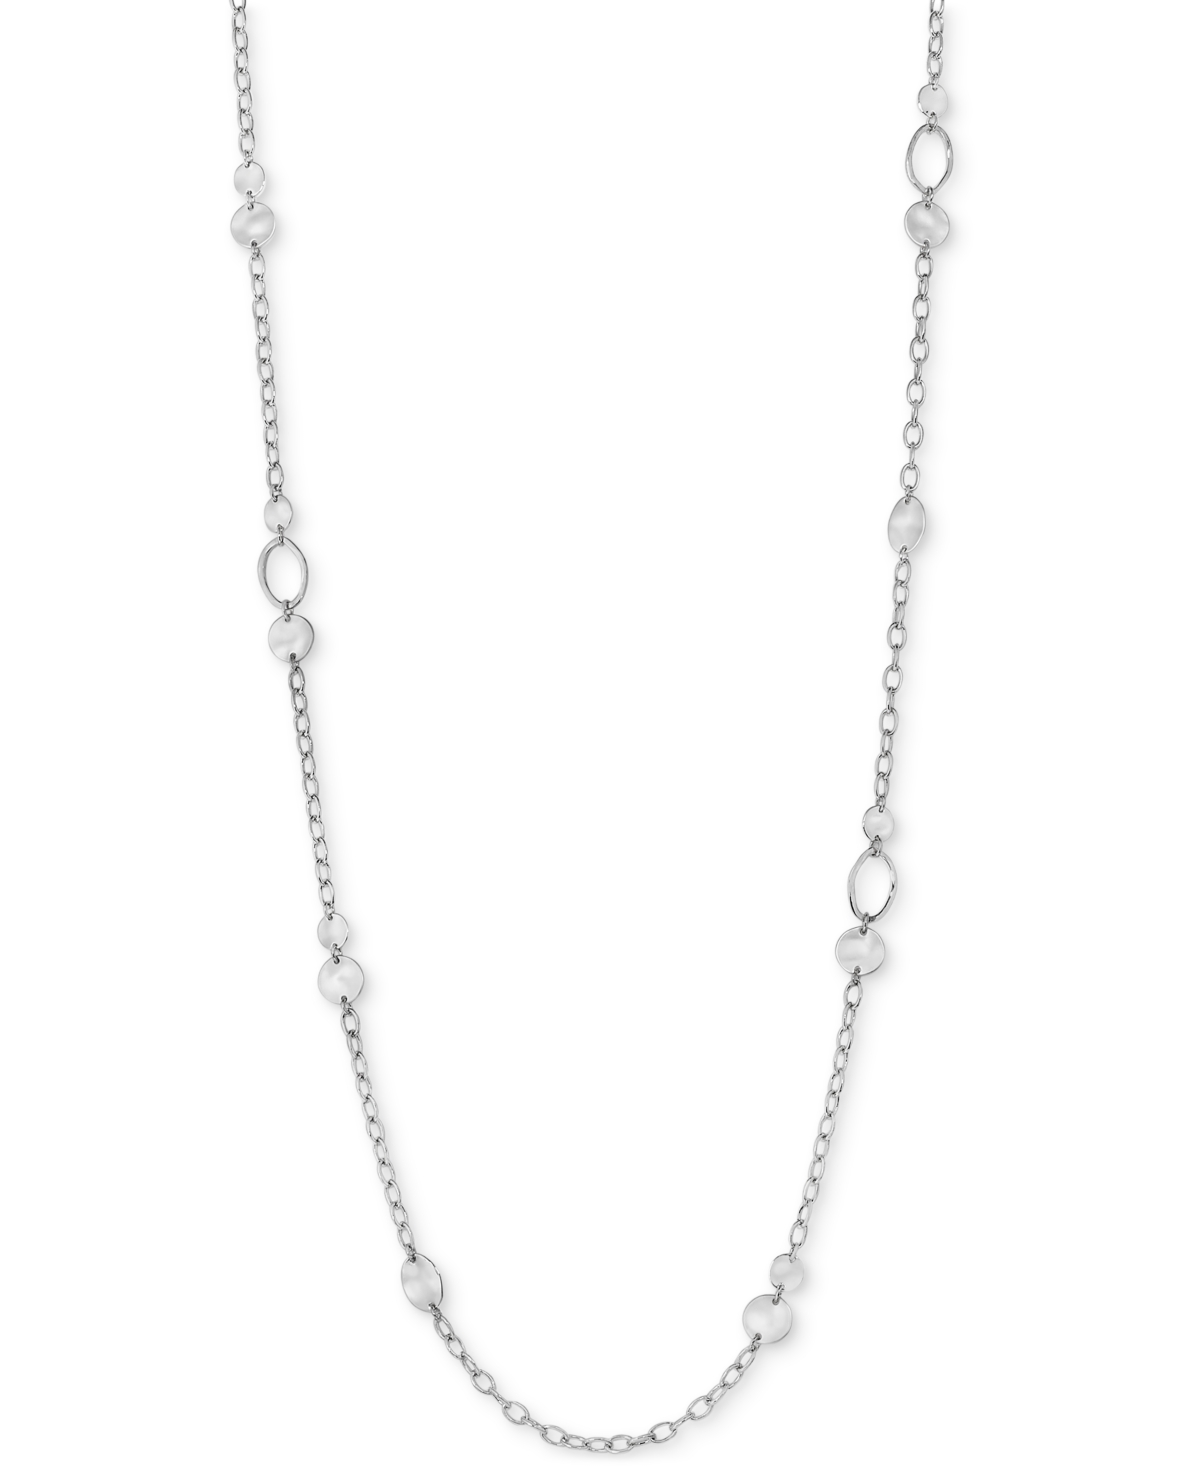 Style & Co Mixed-metal Beaded Long Necklace, 42-1/2" + 3" Extender, Created For Macy's In Silver